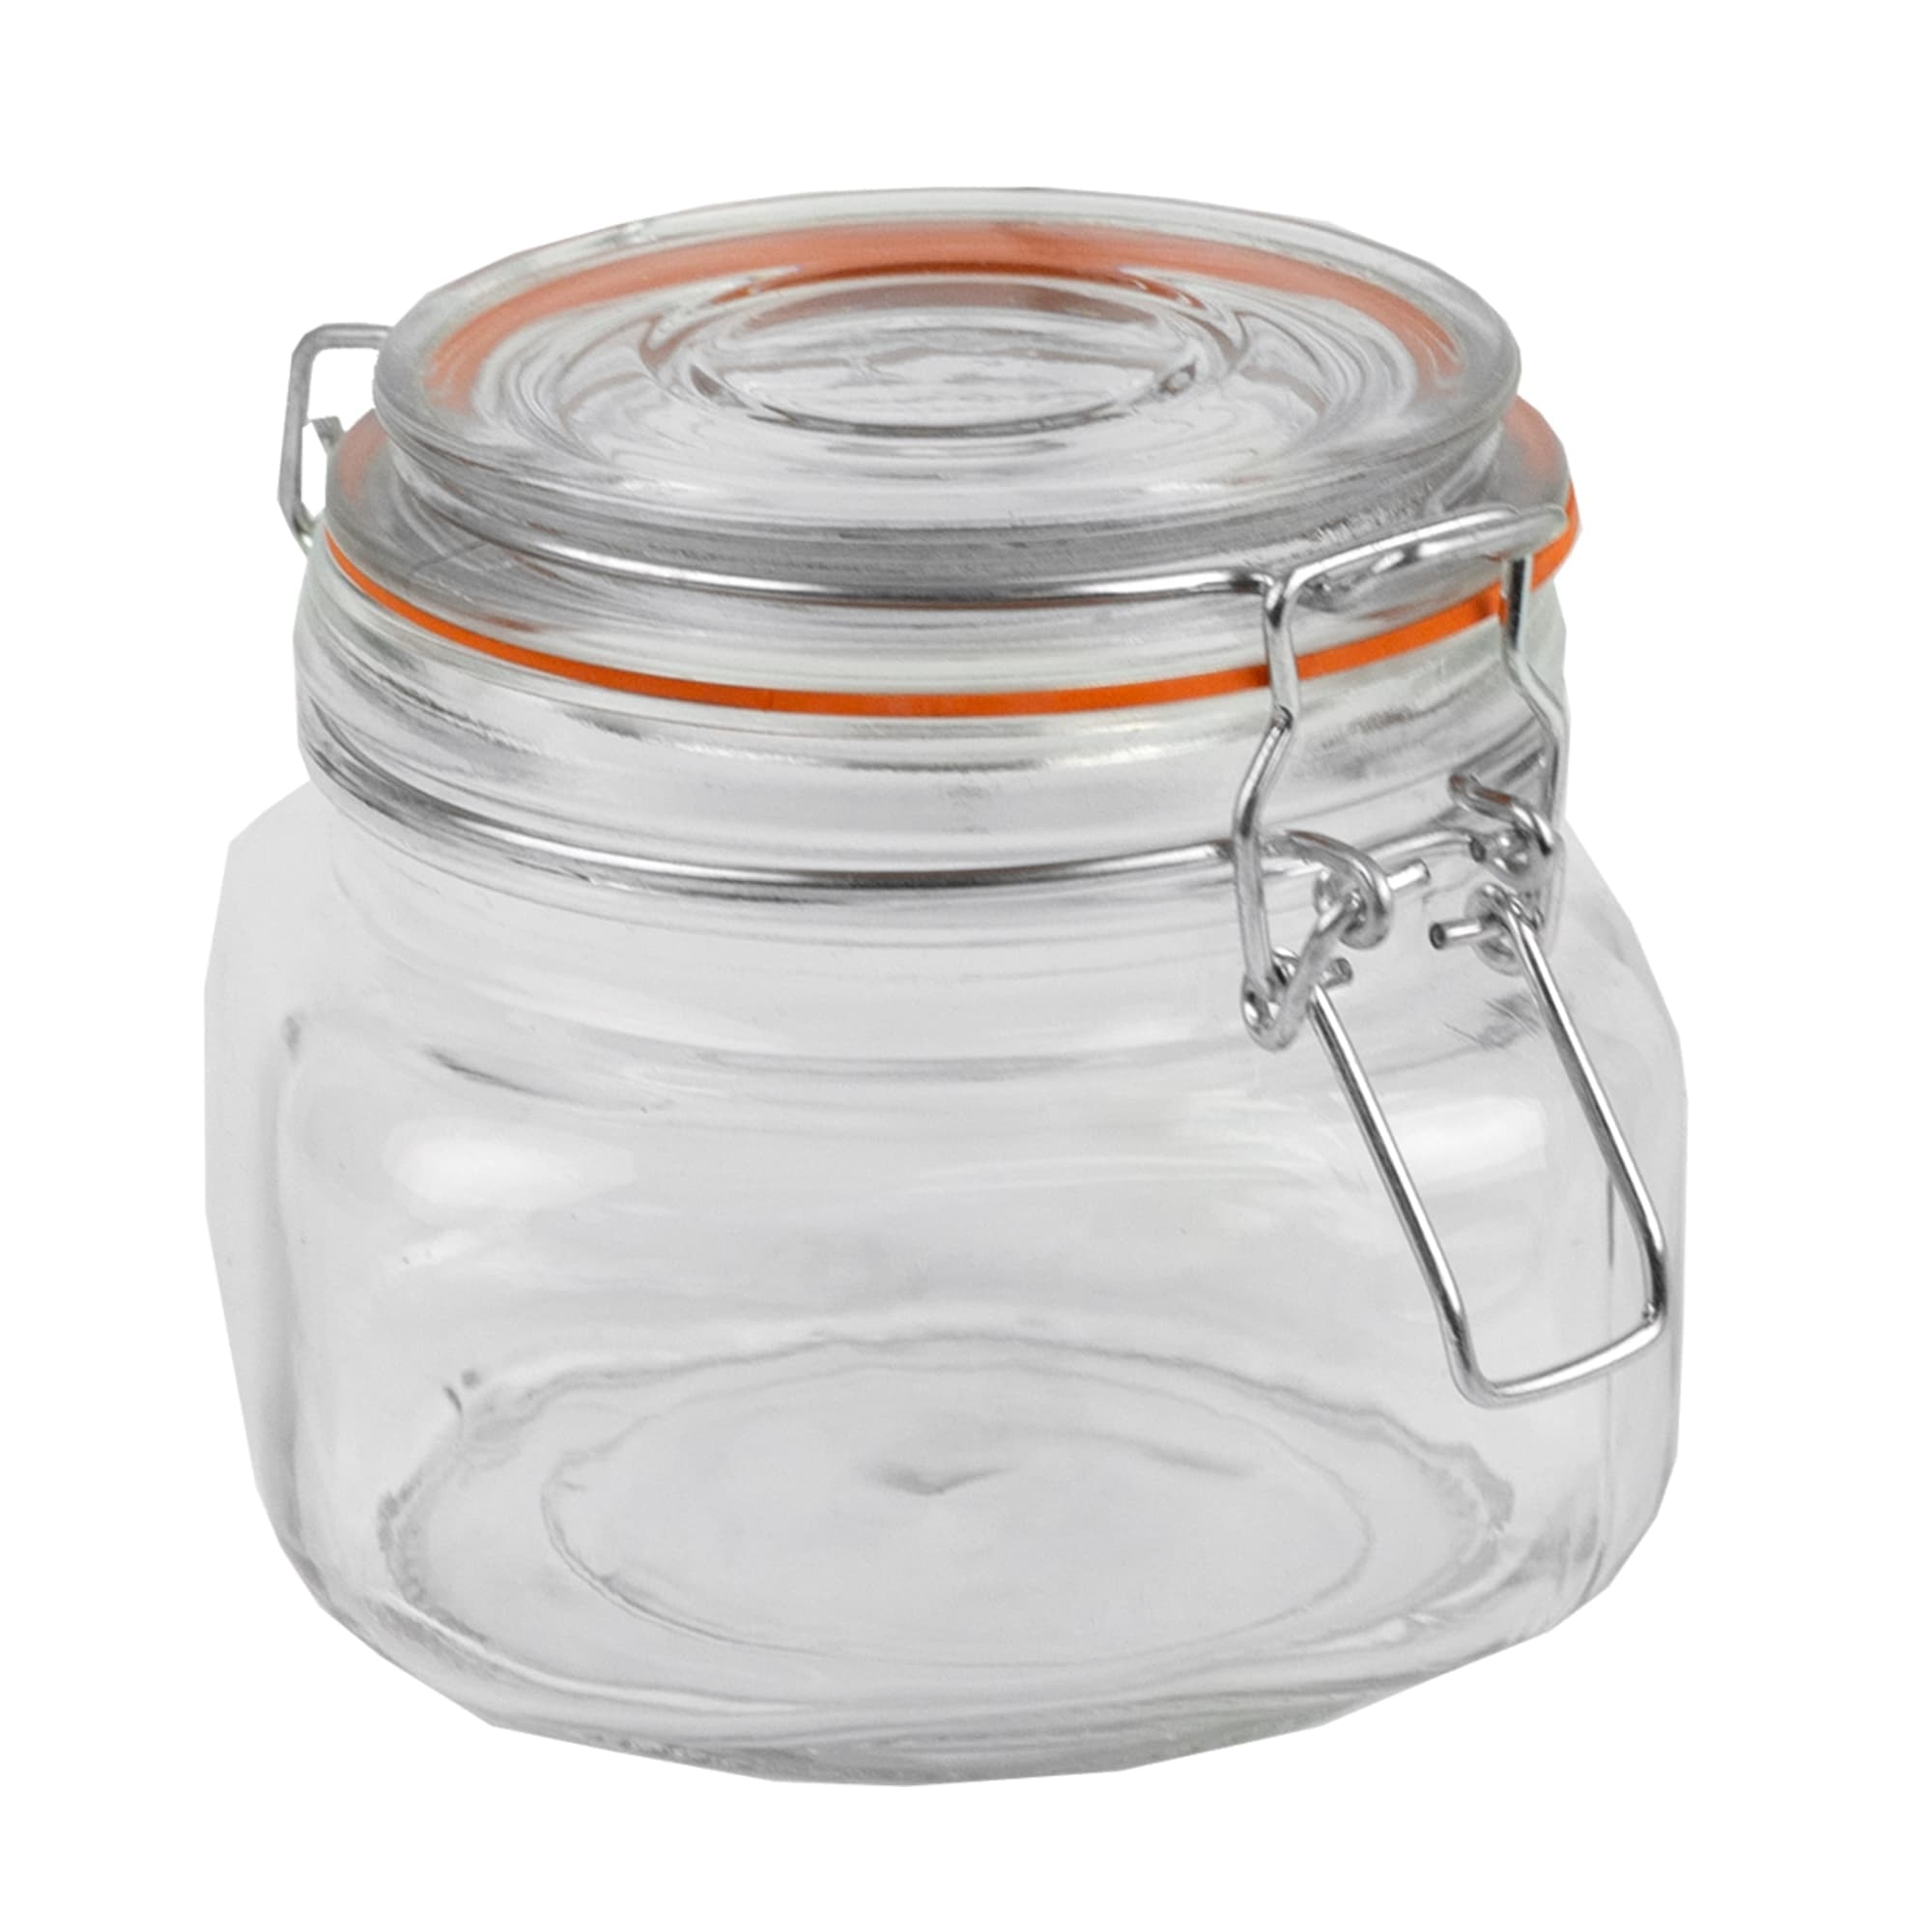 Home Basics 14 oz. Glass Pickling Jar with Wire Bail Lid and Rubber Seal Gasket $2.50 EACH, CASE PACK OF 12